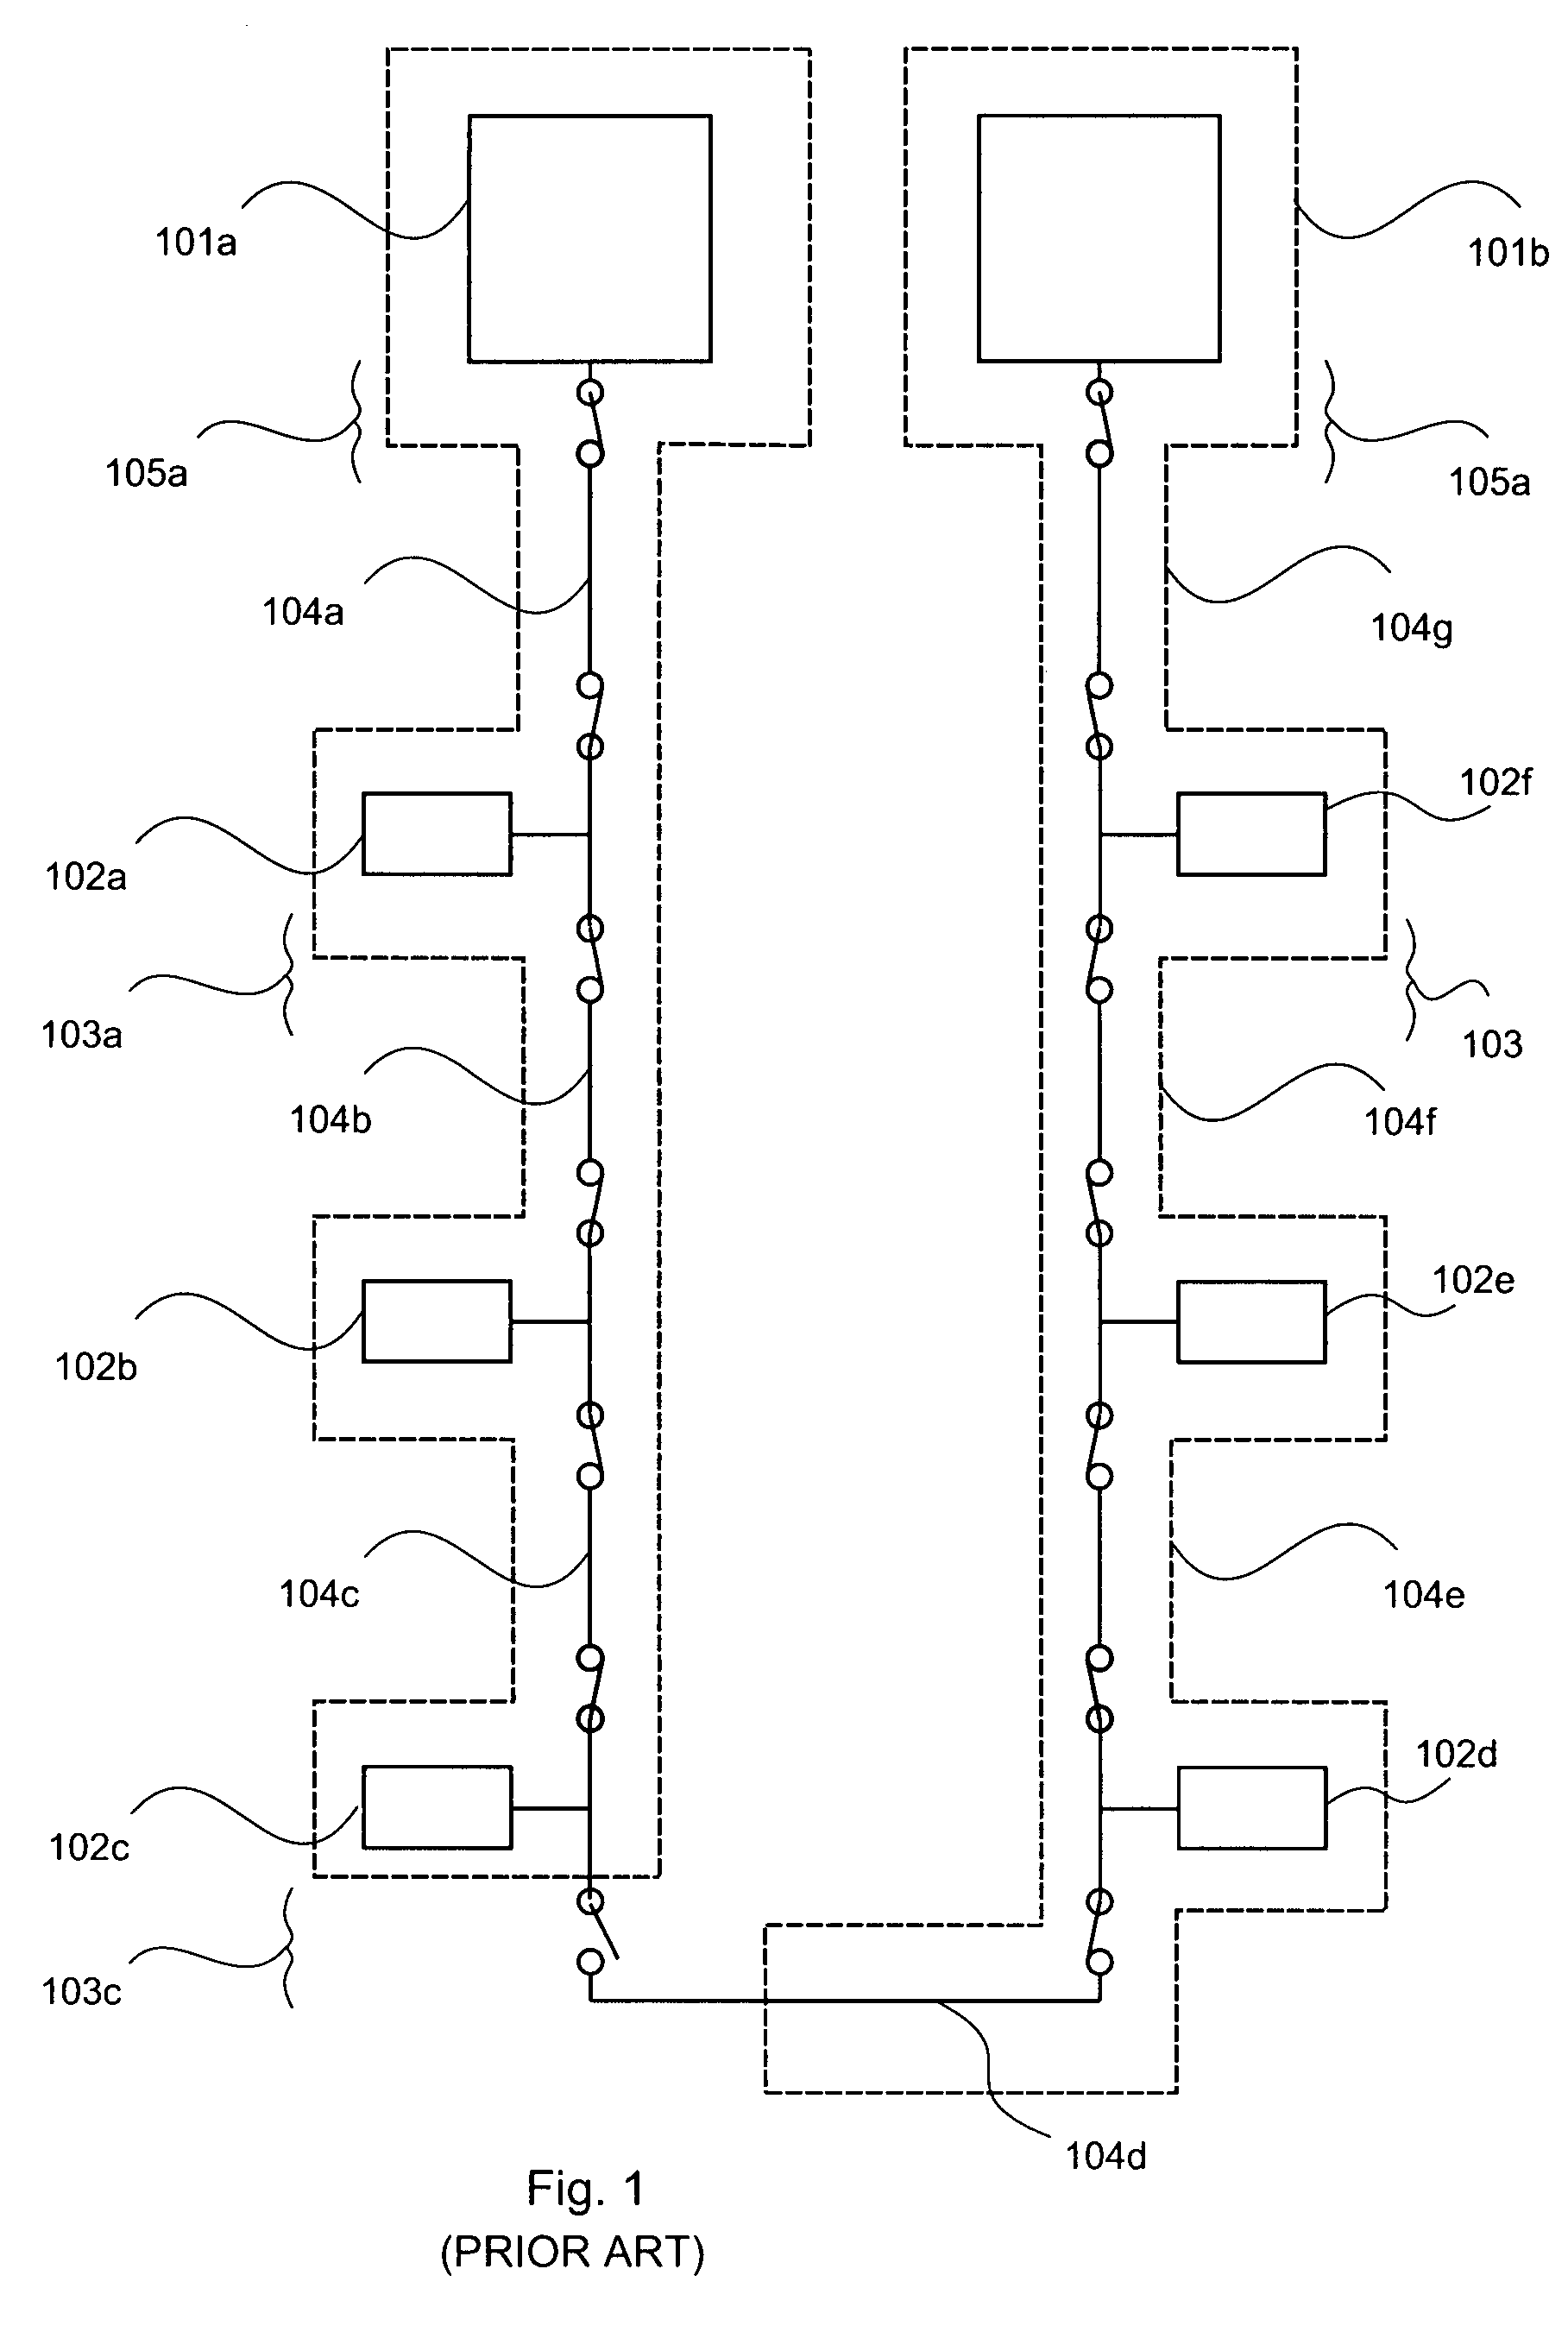 Power restoration system for electrical power network